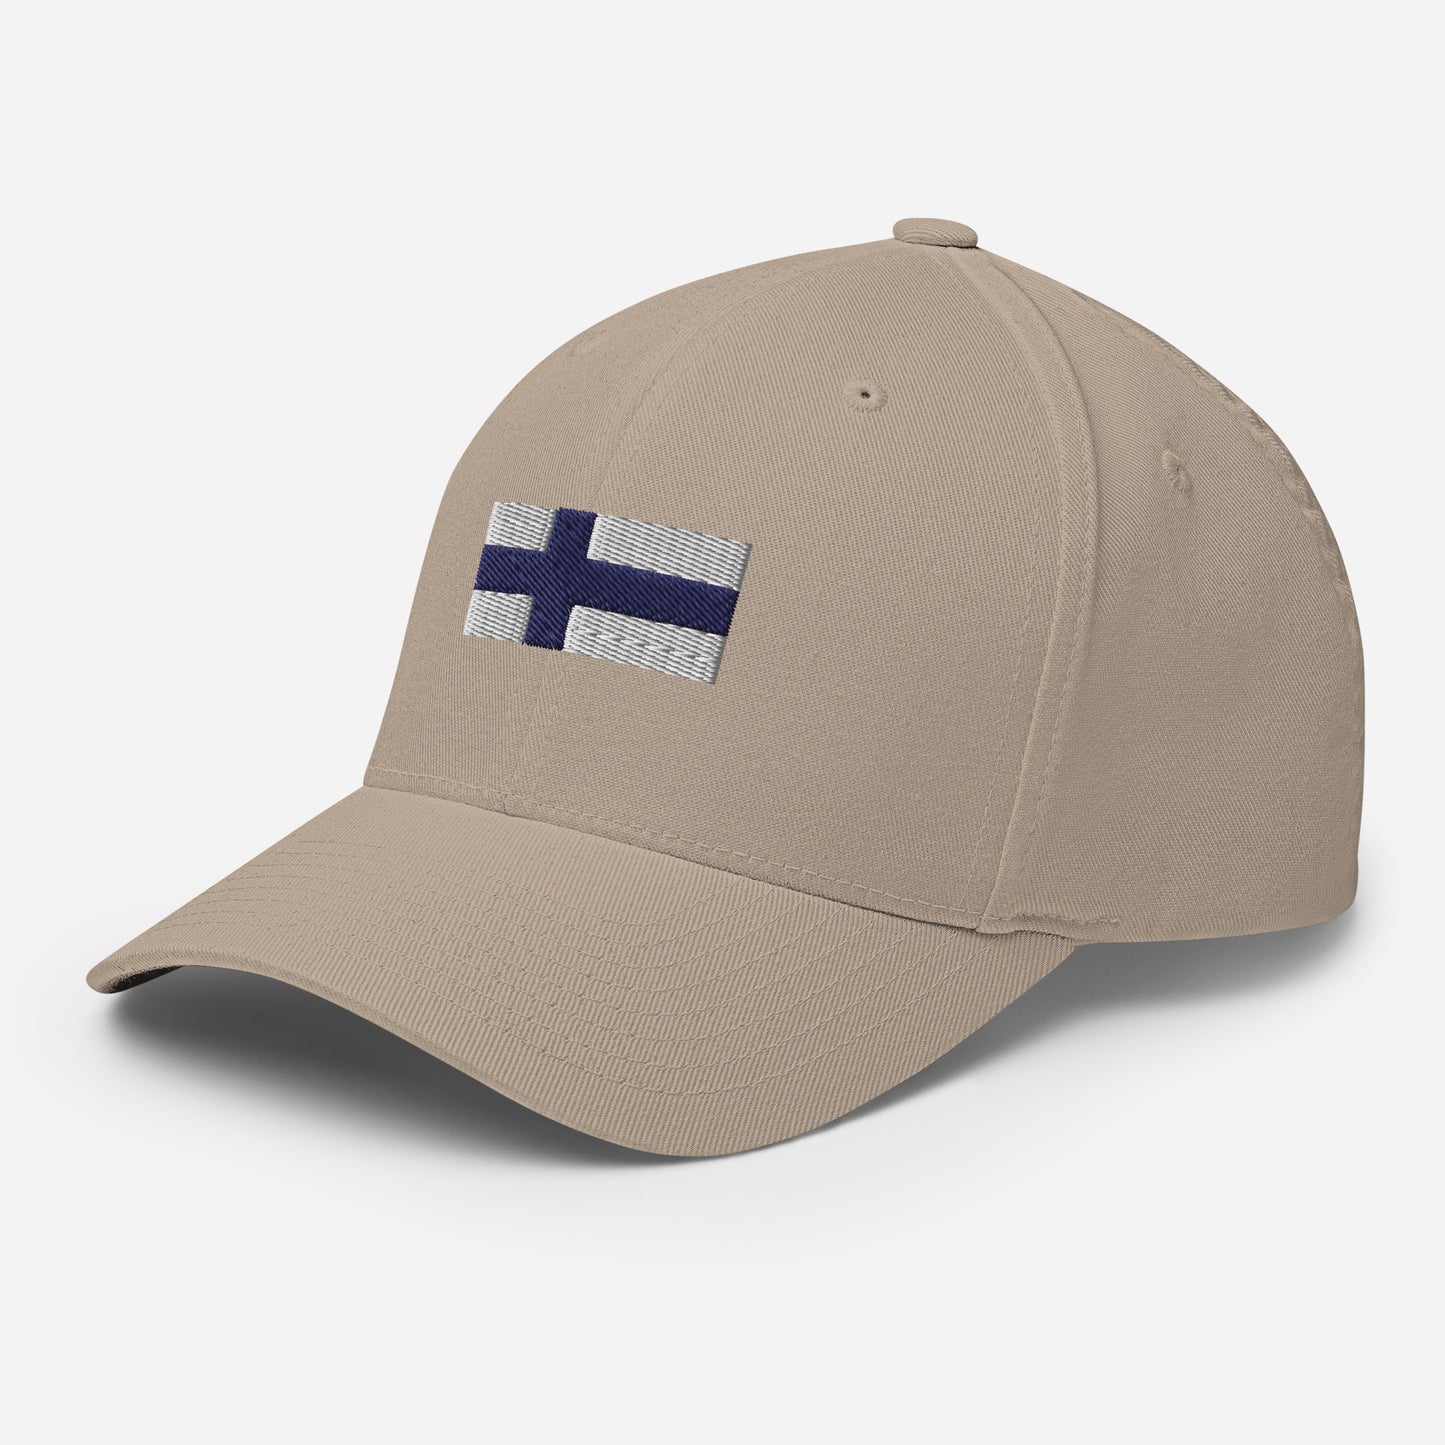 cap-from-the-front-with-finnish-flag